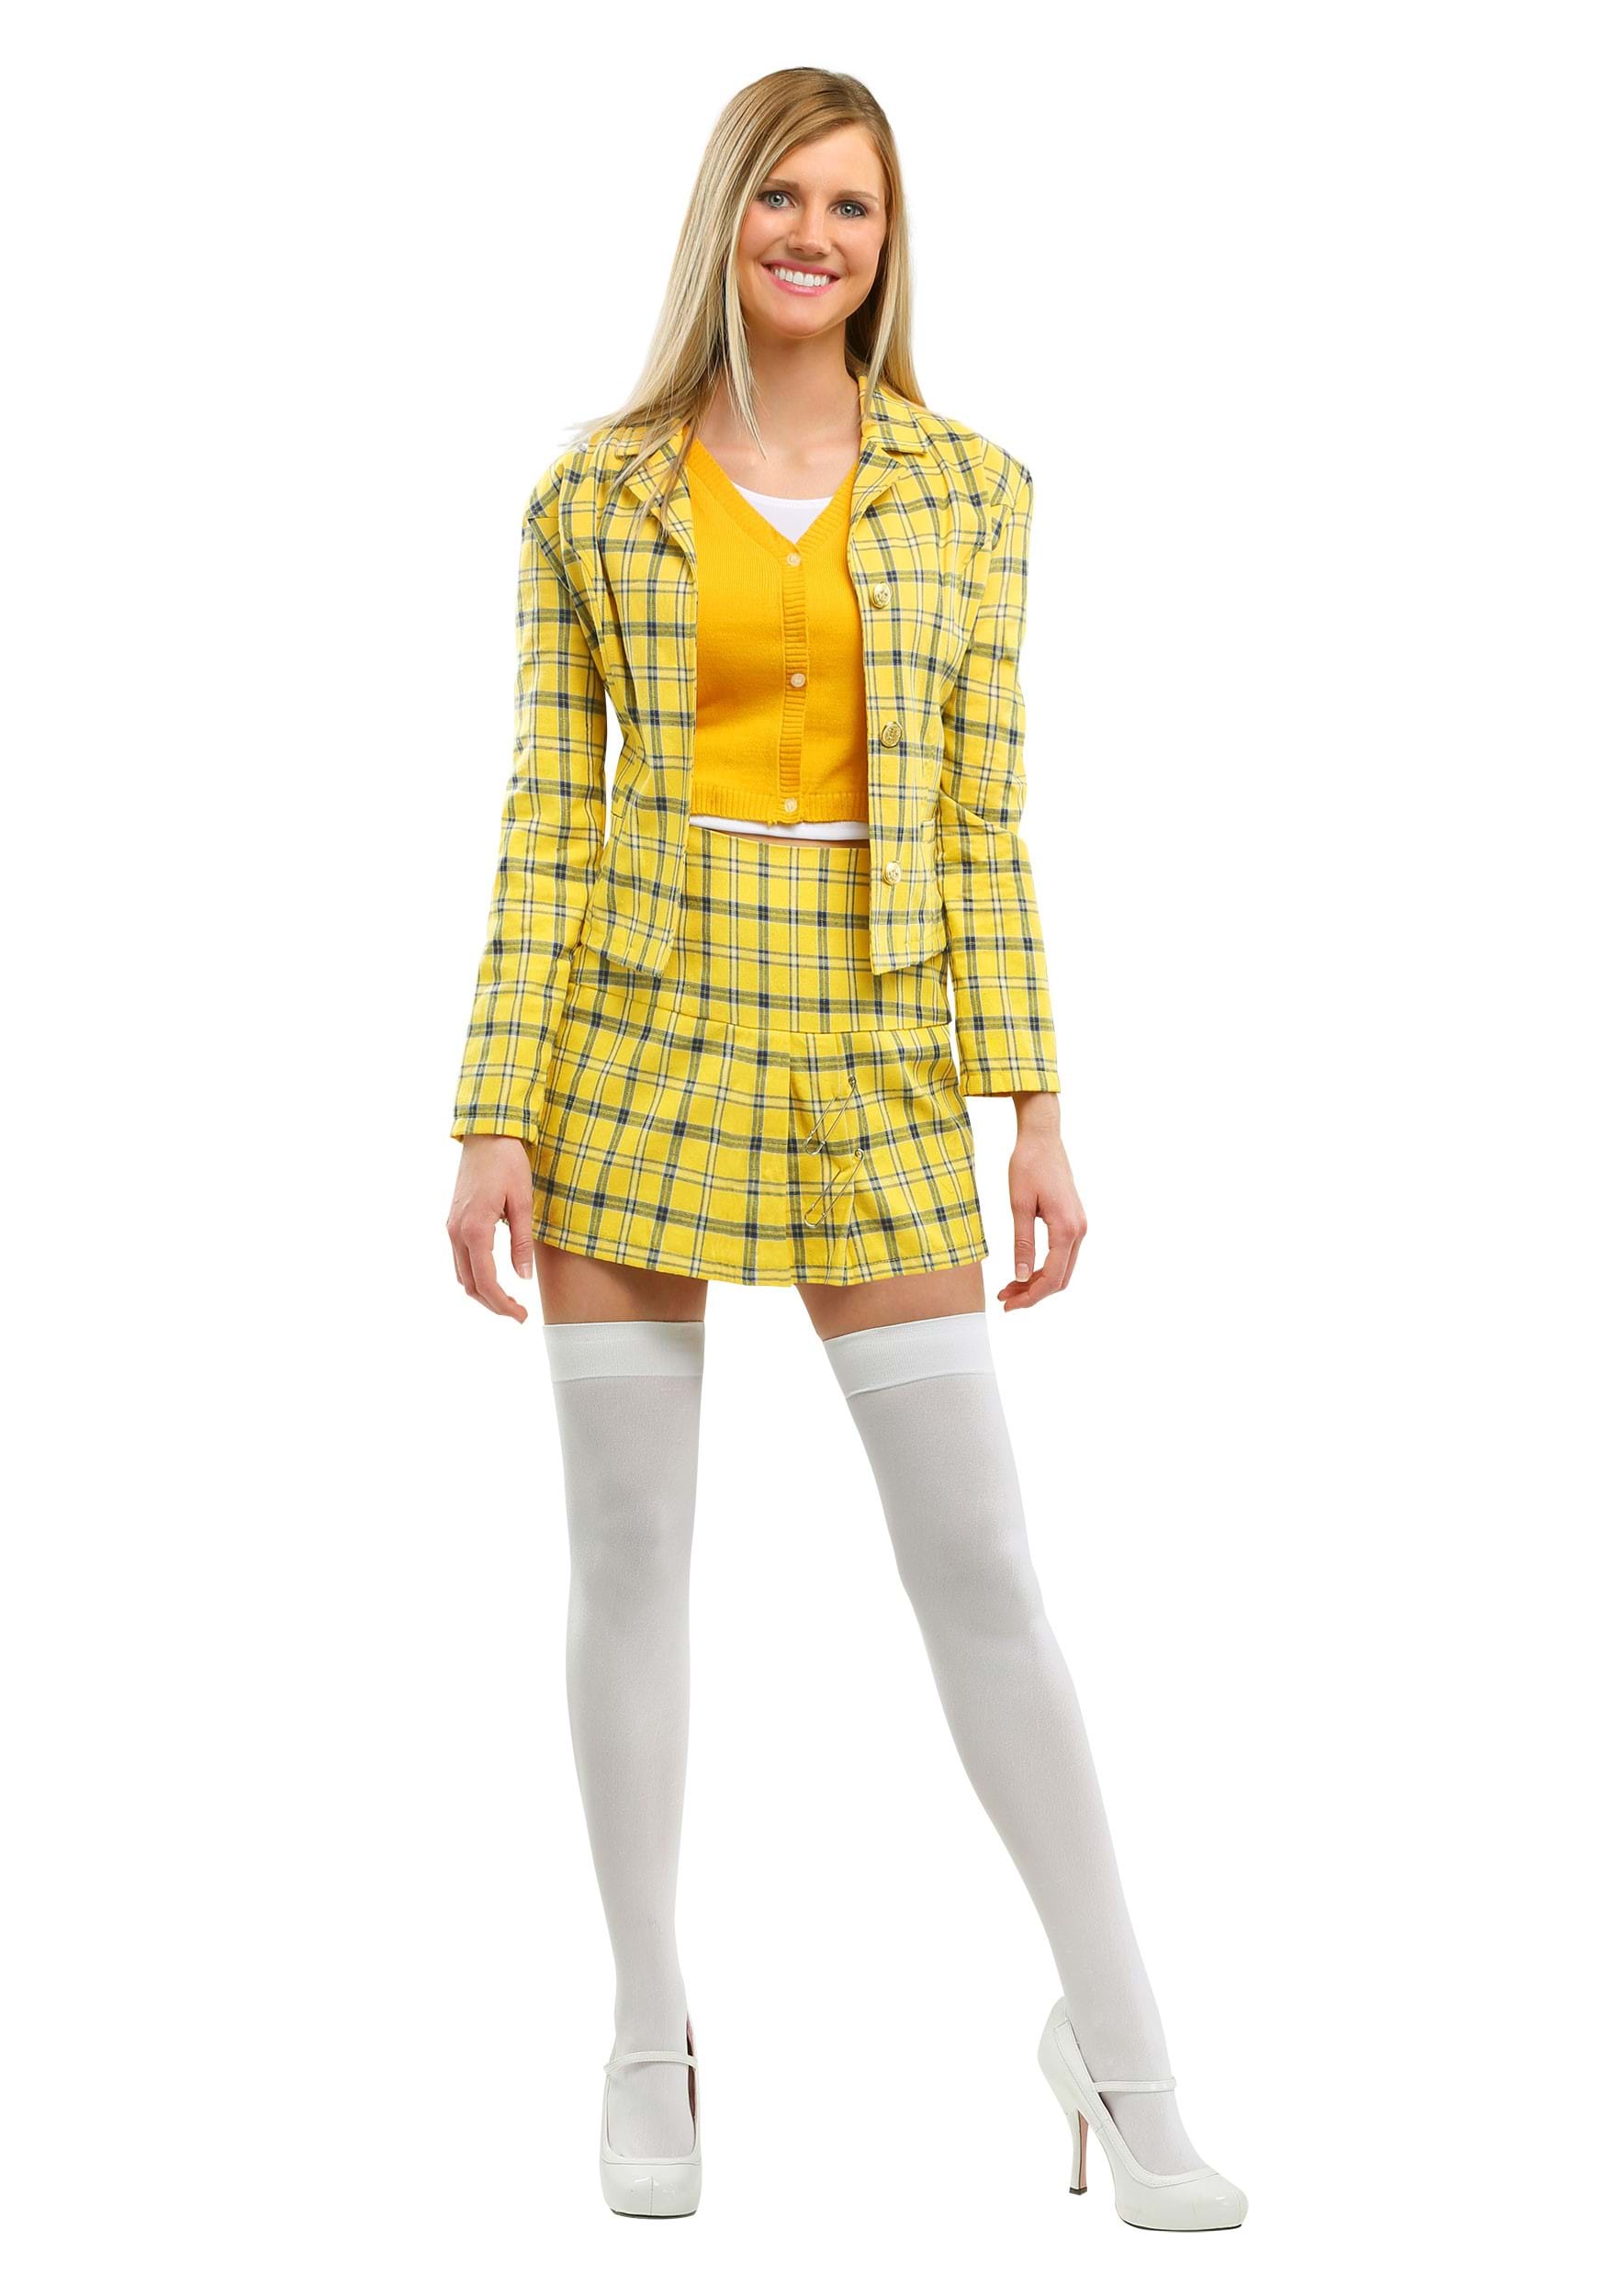 Image of Clueless Cher Costume for Women | Exclusive | Made By Us ID FUN2948AD-XL